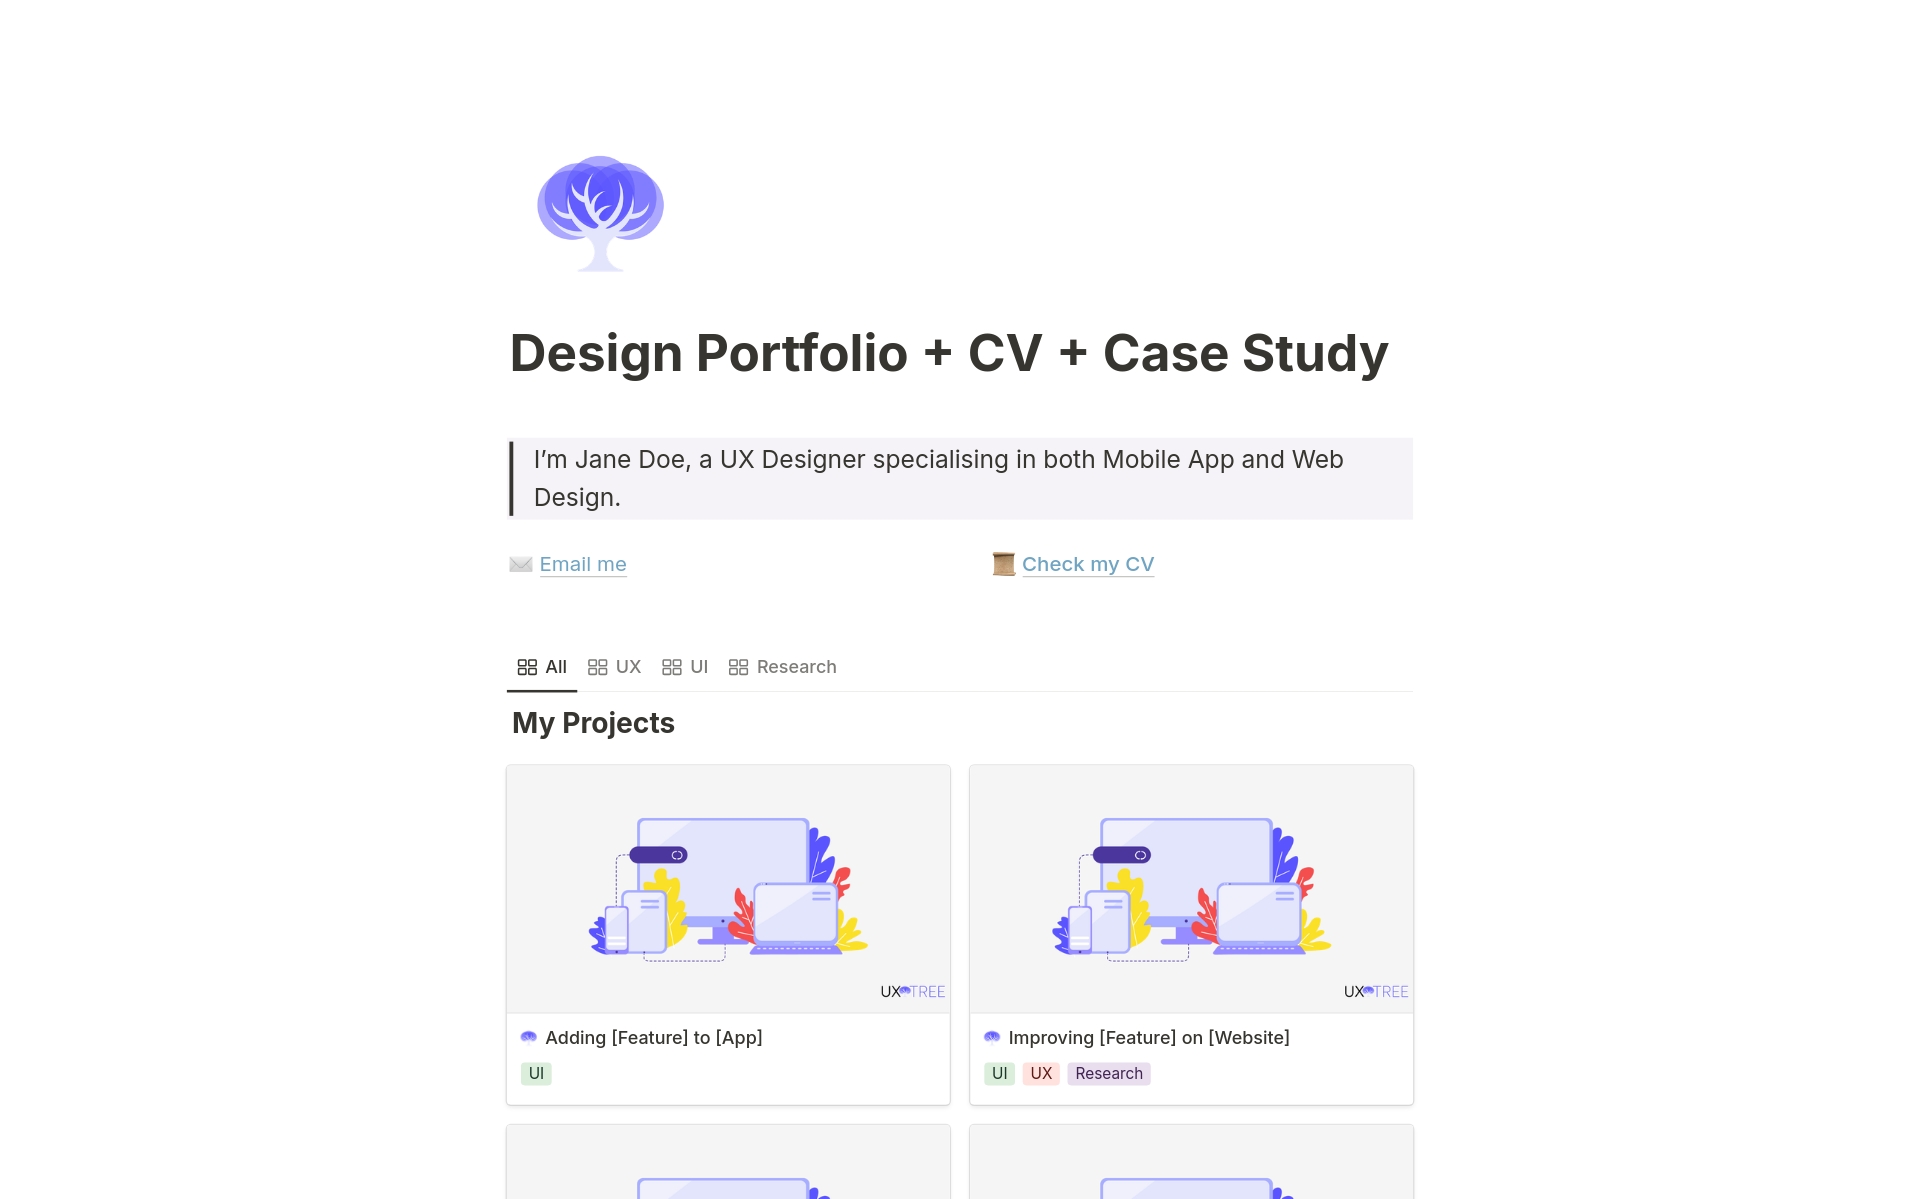 Welcome to our comprehensive template featuring a design portfolio, case study, and CV, all bundled together for your UX career journey. This resource provides everything you need as you begin applying for jobs in the field. 